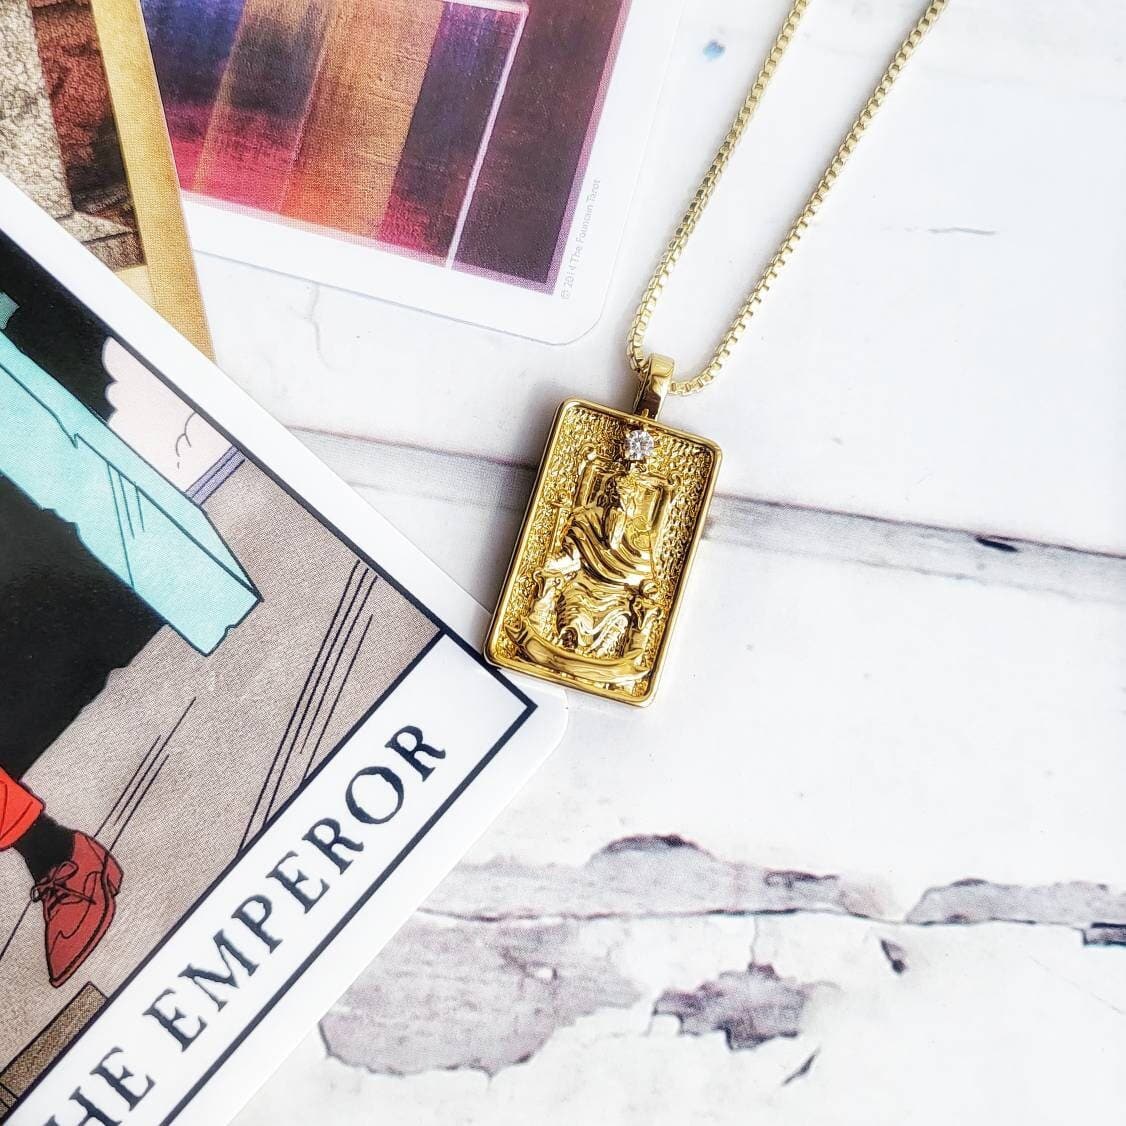 THE EMPEROR Tarot Card Necklace | 14K Gold Pendant Necklace | Delicate Minimalist Intention Celestial Necklace | Aries Astrology Jewelry